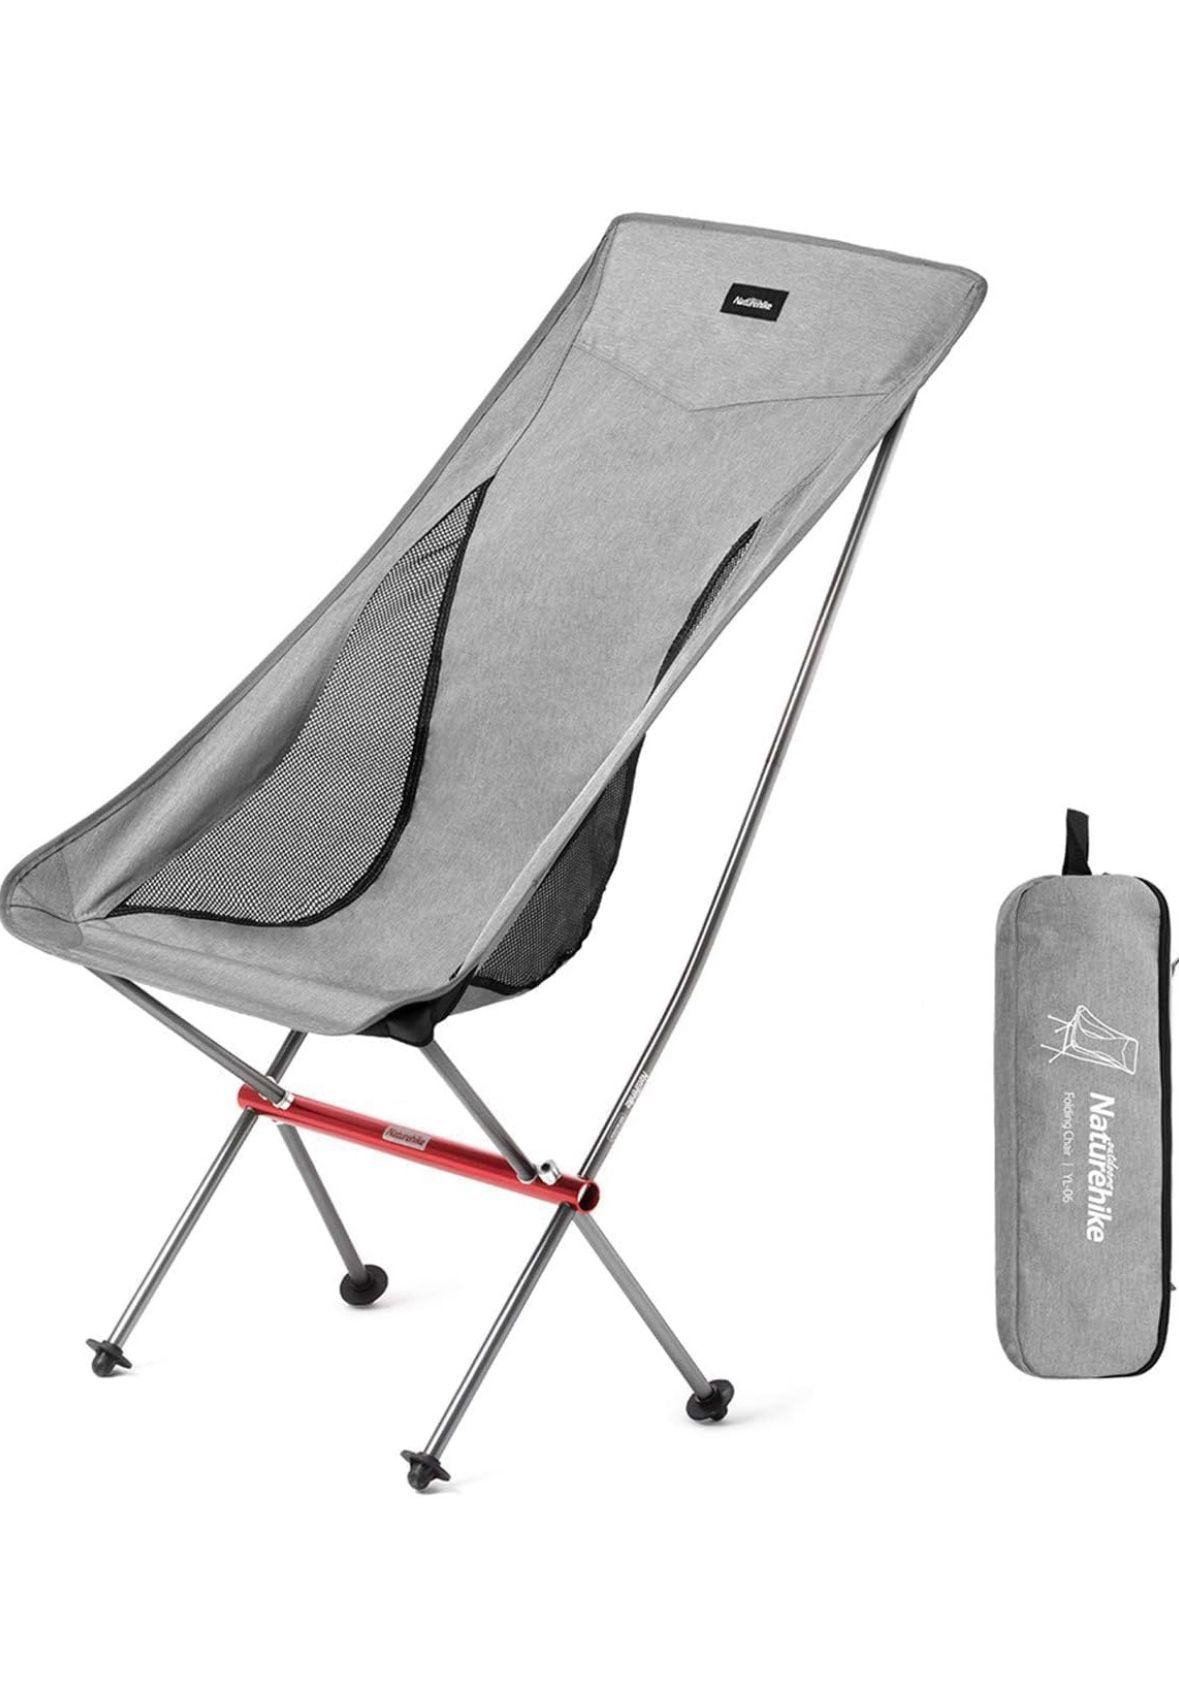 Naturehike Folding Camping Chair, Lightweight High Back Portable Compact Chair, Large Heavy Duty 330lbs for Adults, Hiking Camp Backpacking